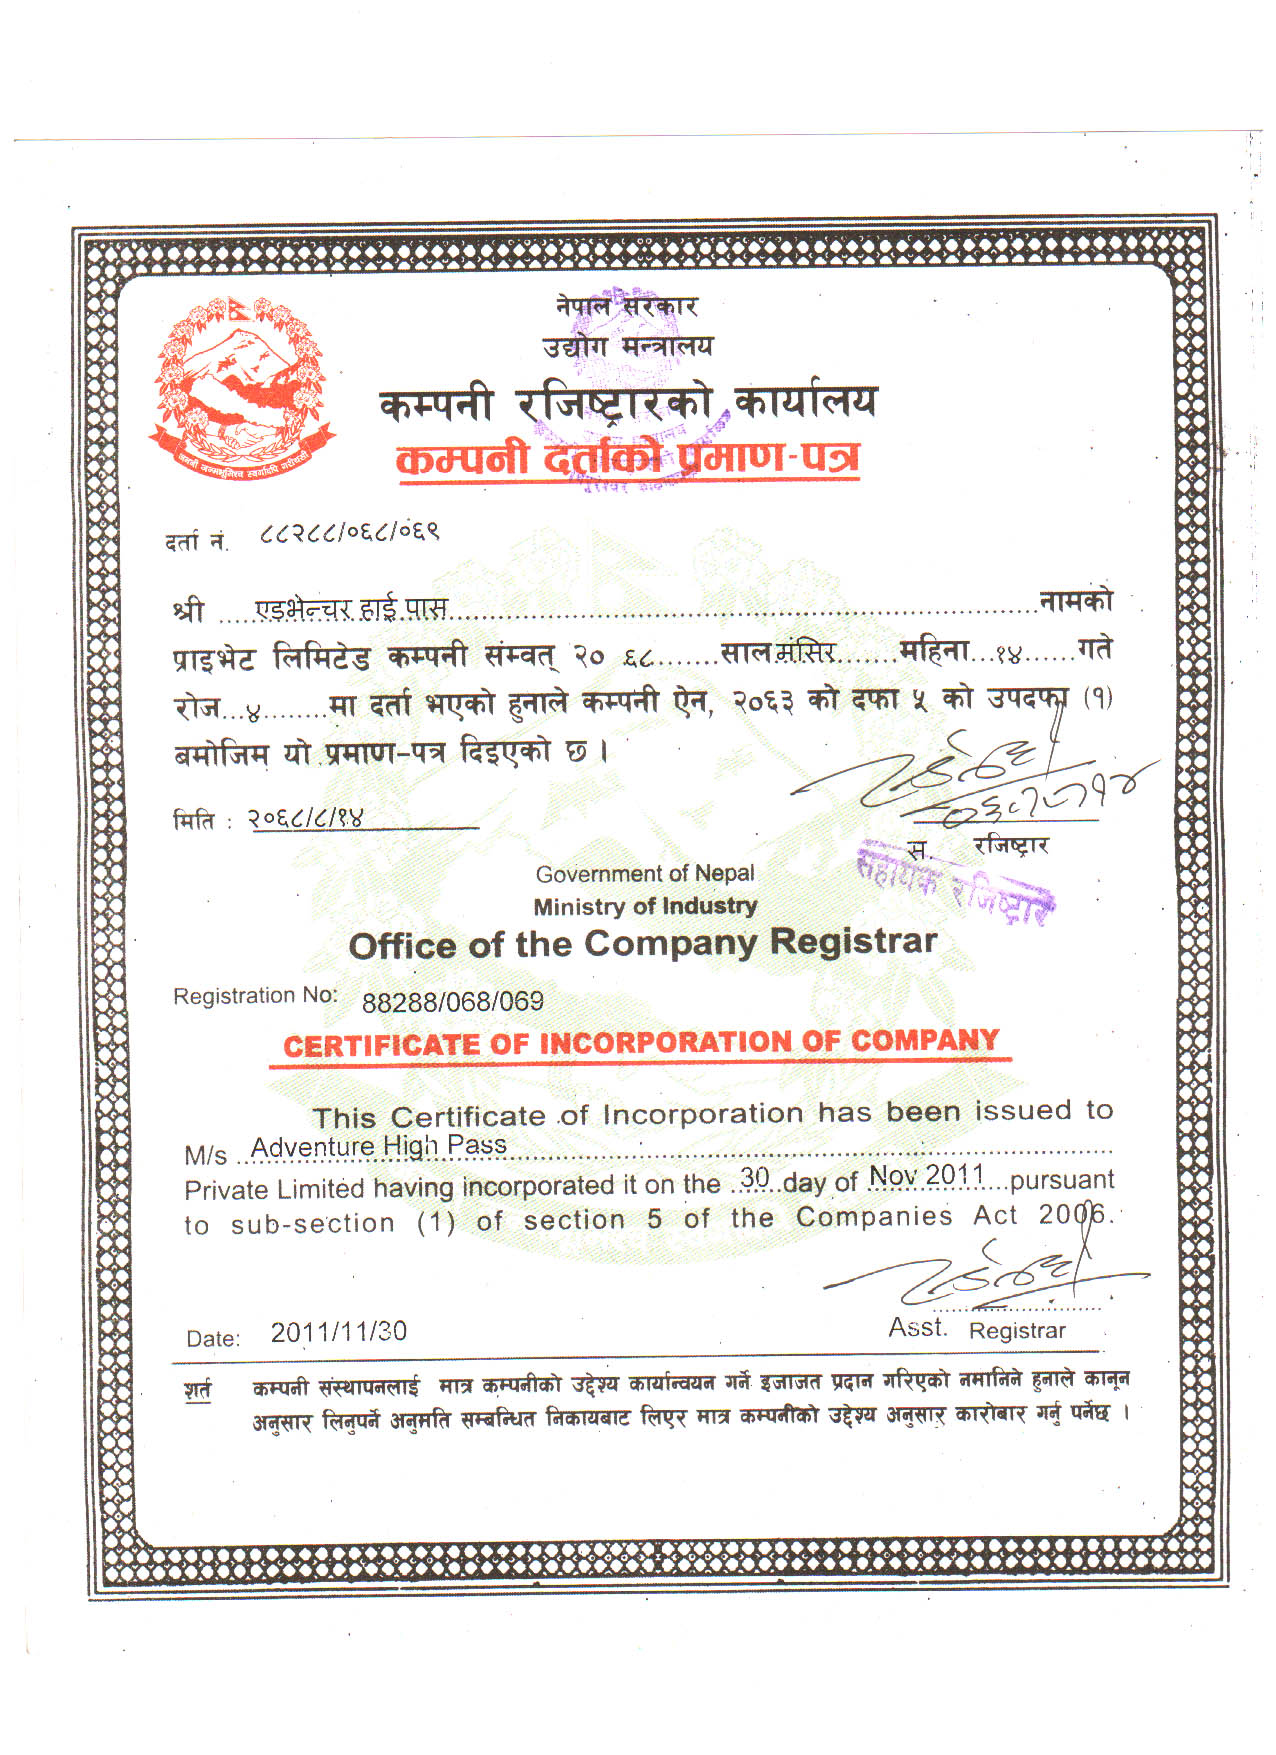 Certificate of Incorporation of company